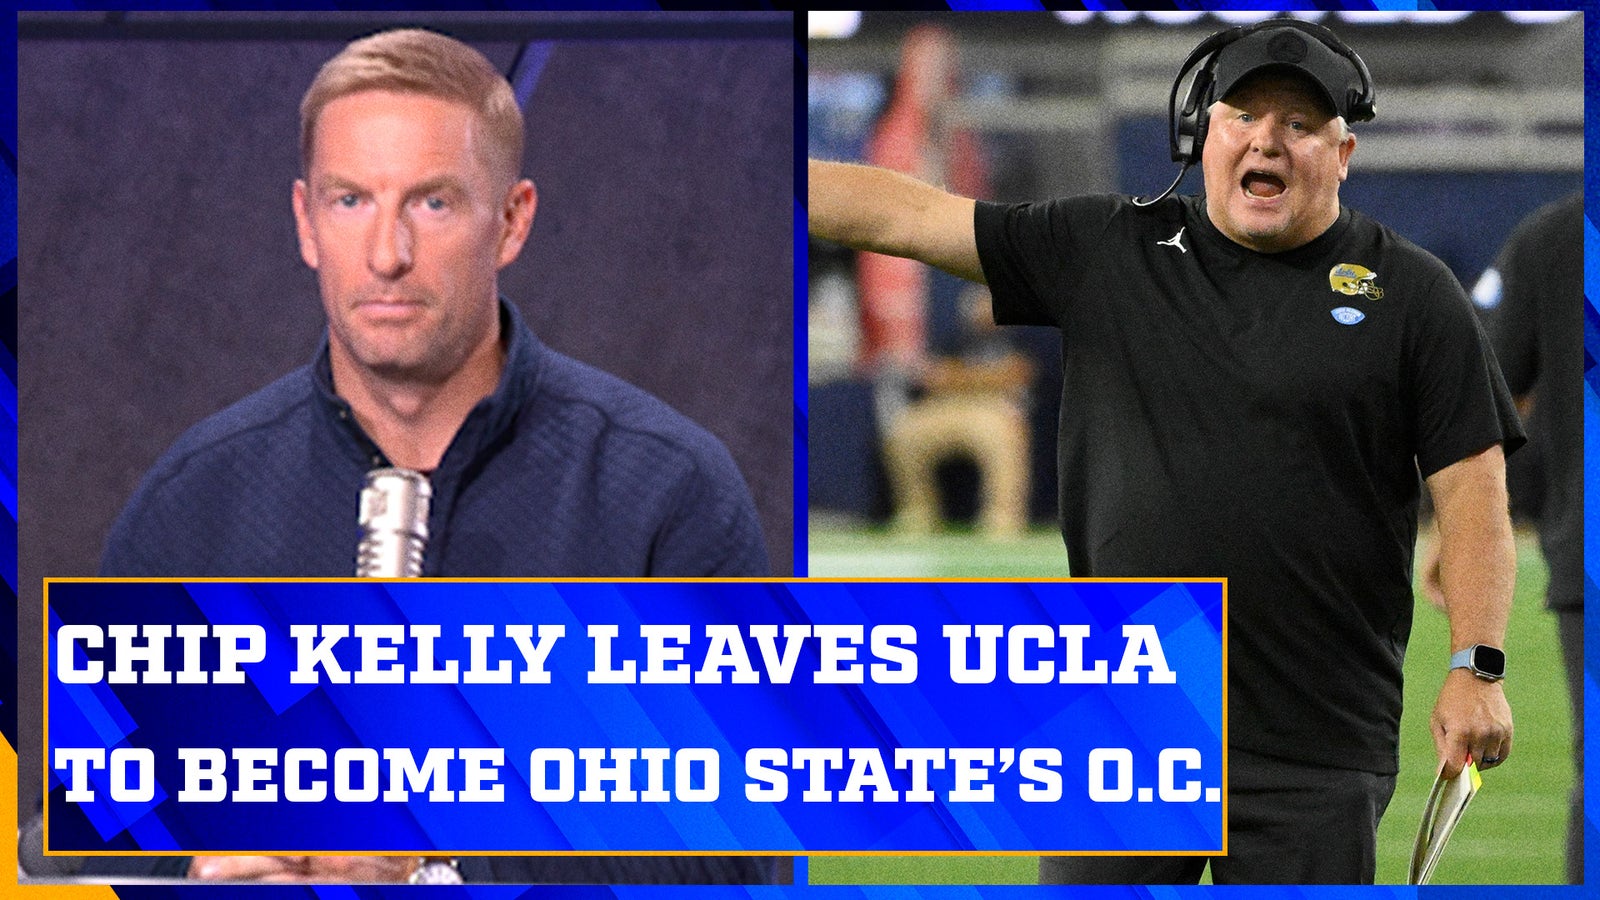 Chip Kelly leaves UCLA to become Ohio State offensive coordinator